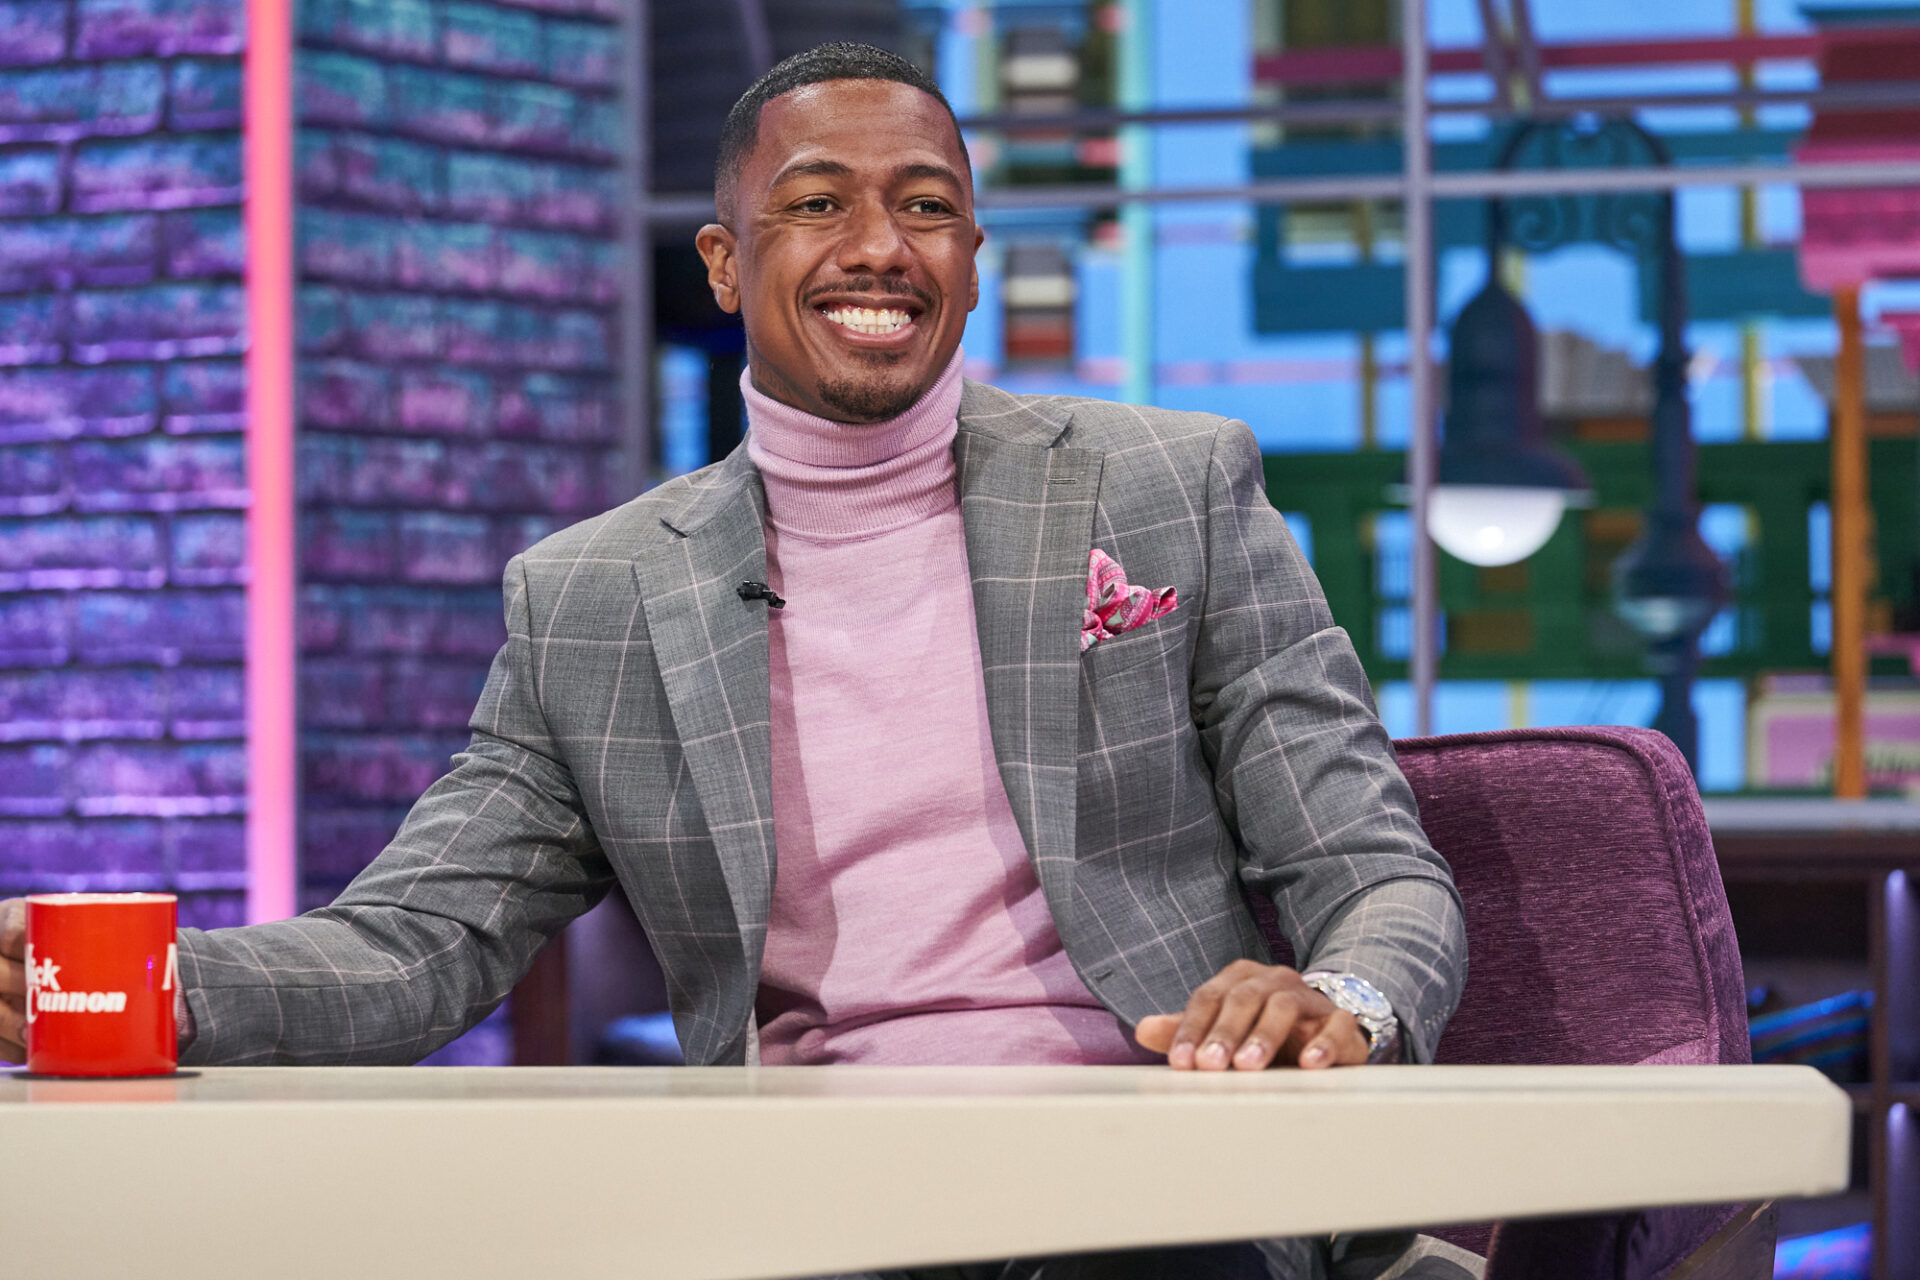 Nick Cannon Says His Viewers are "Family" Amid Show Cancellation